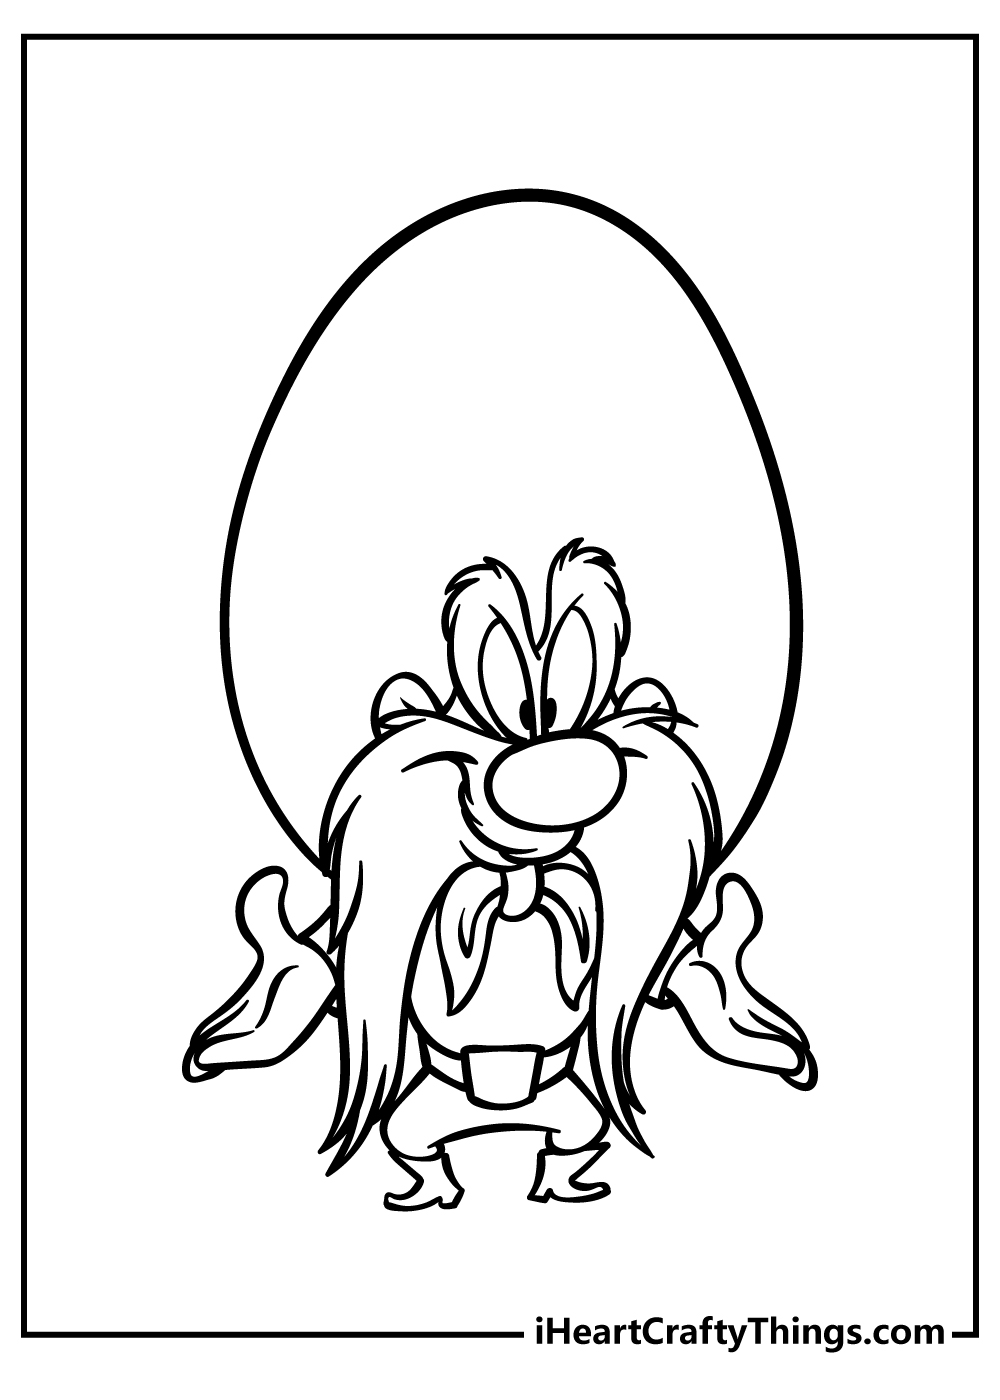 Looney Tunes Coloring Sheet for children free download